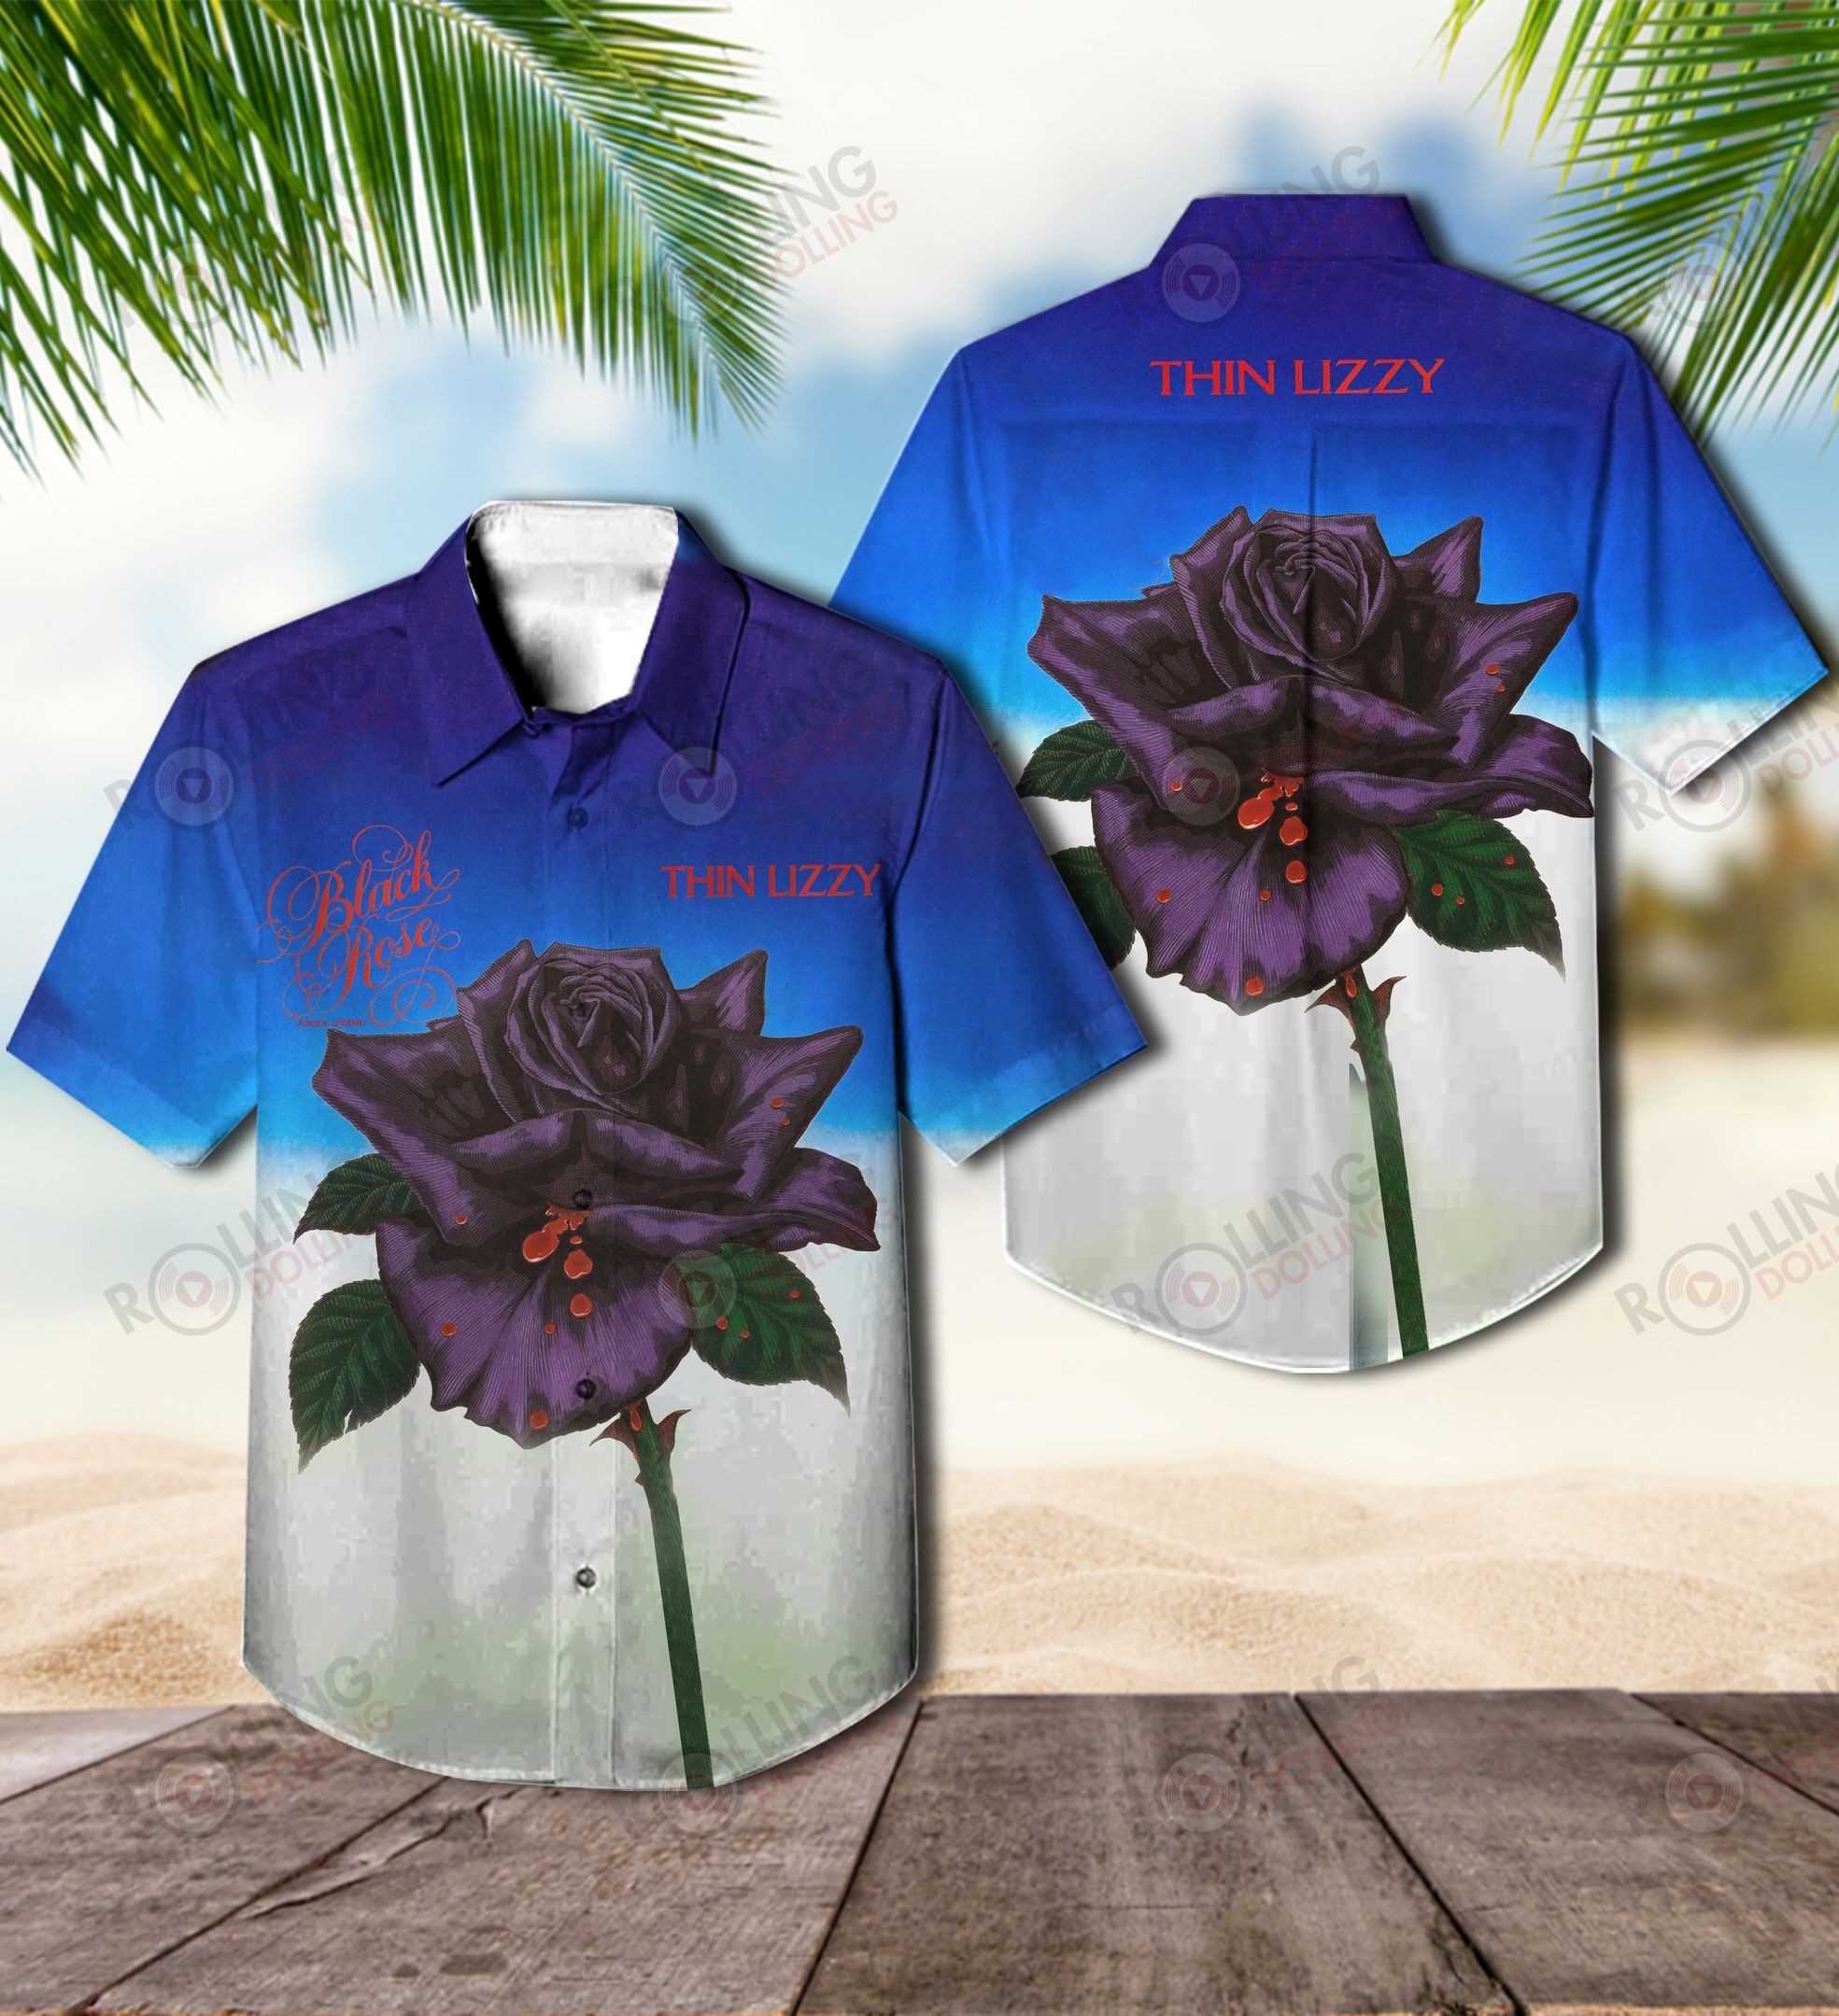 This would make a great gift for any fan who loves Hawaiian Shirt as well as Rock band 104